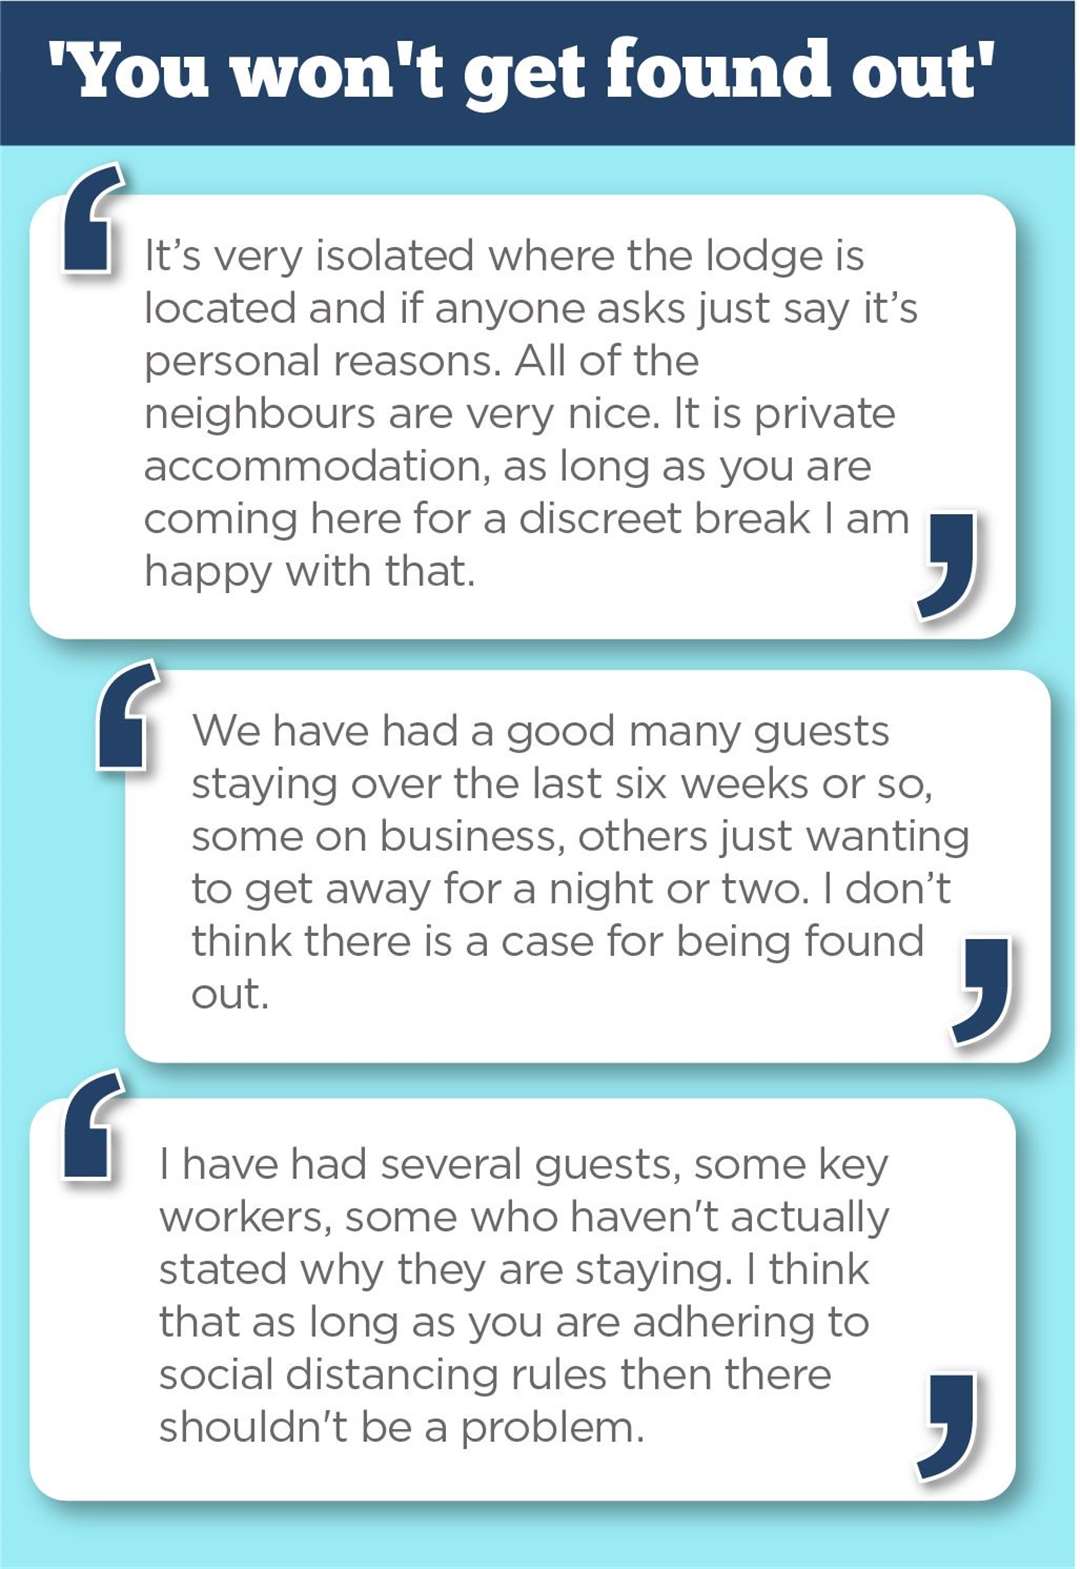 Some of the responses from Airbnb hosts to our requests for a weekend getaway